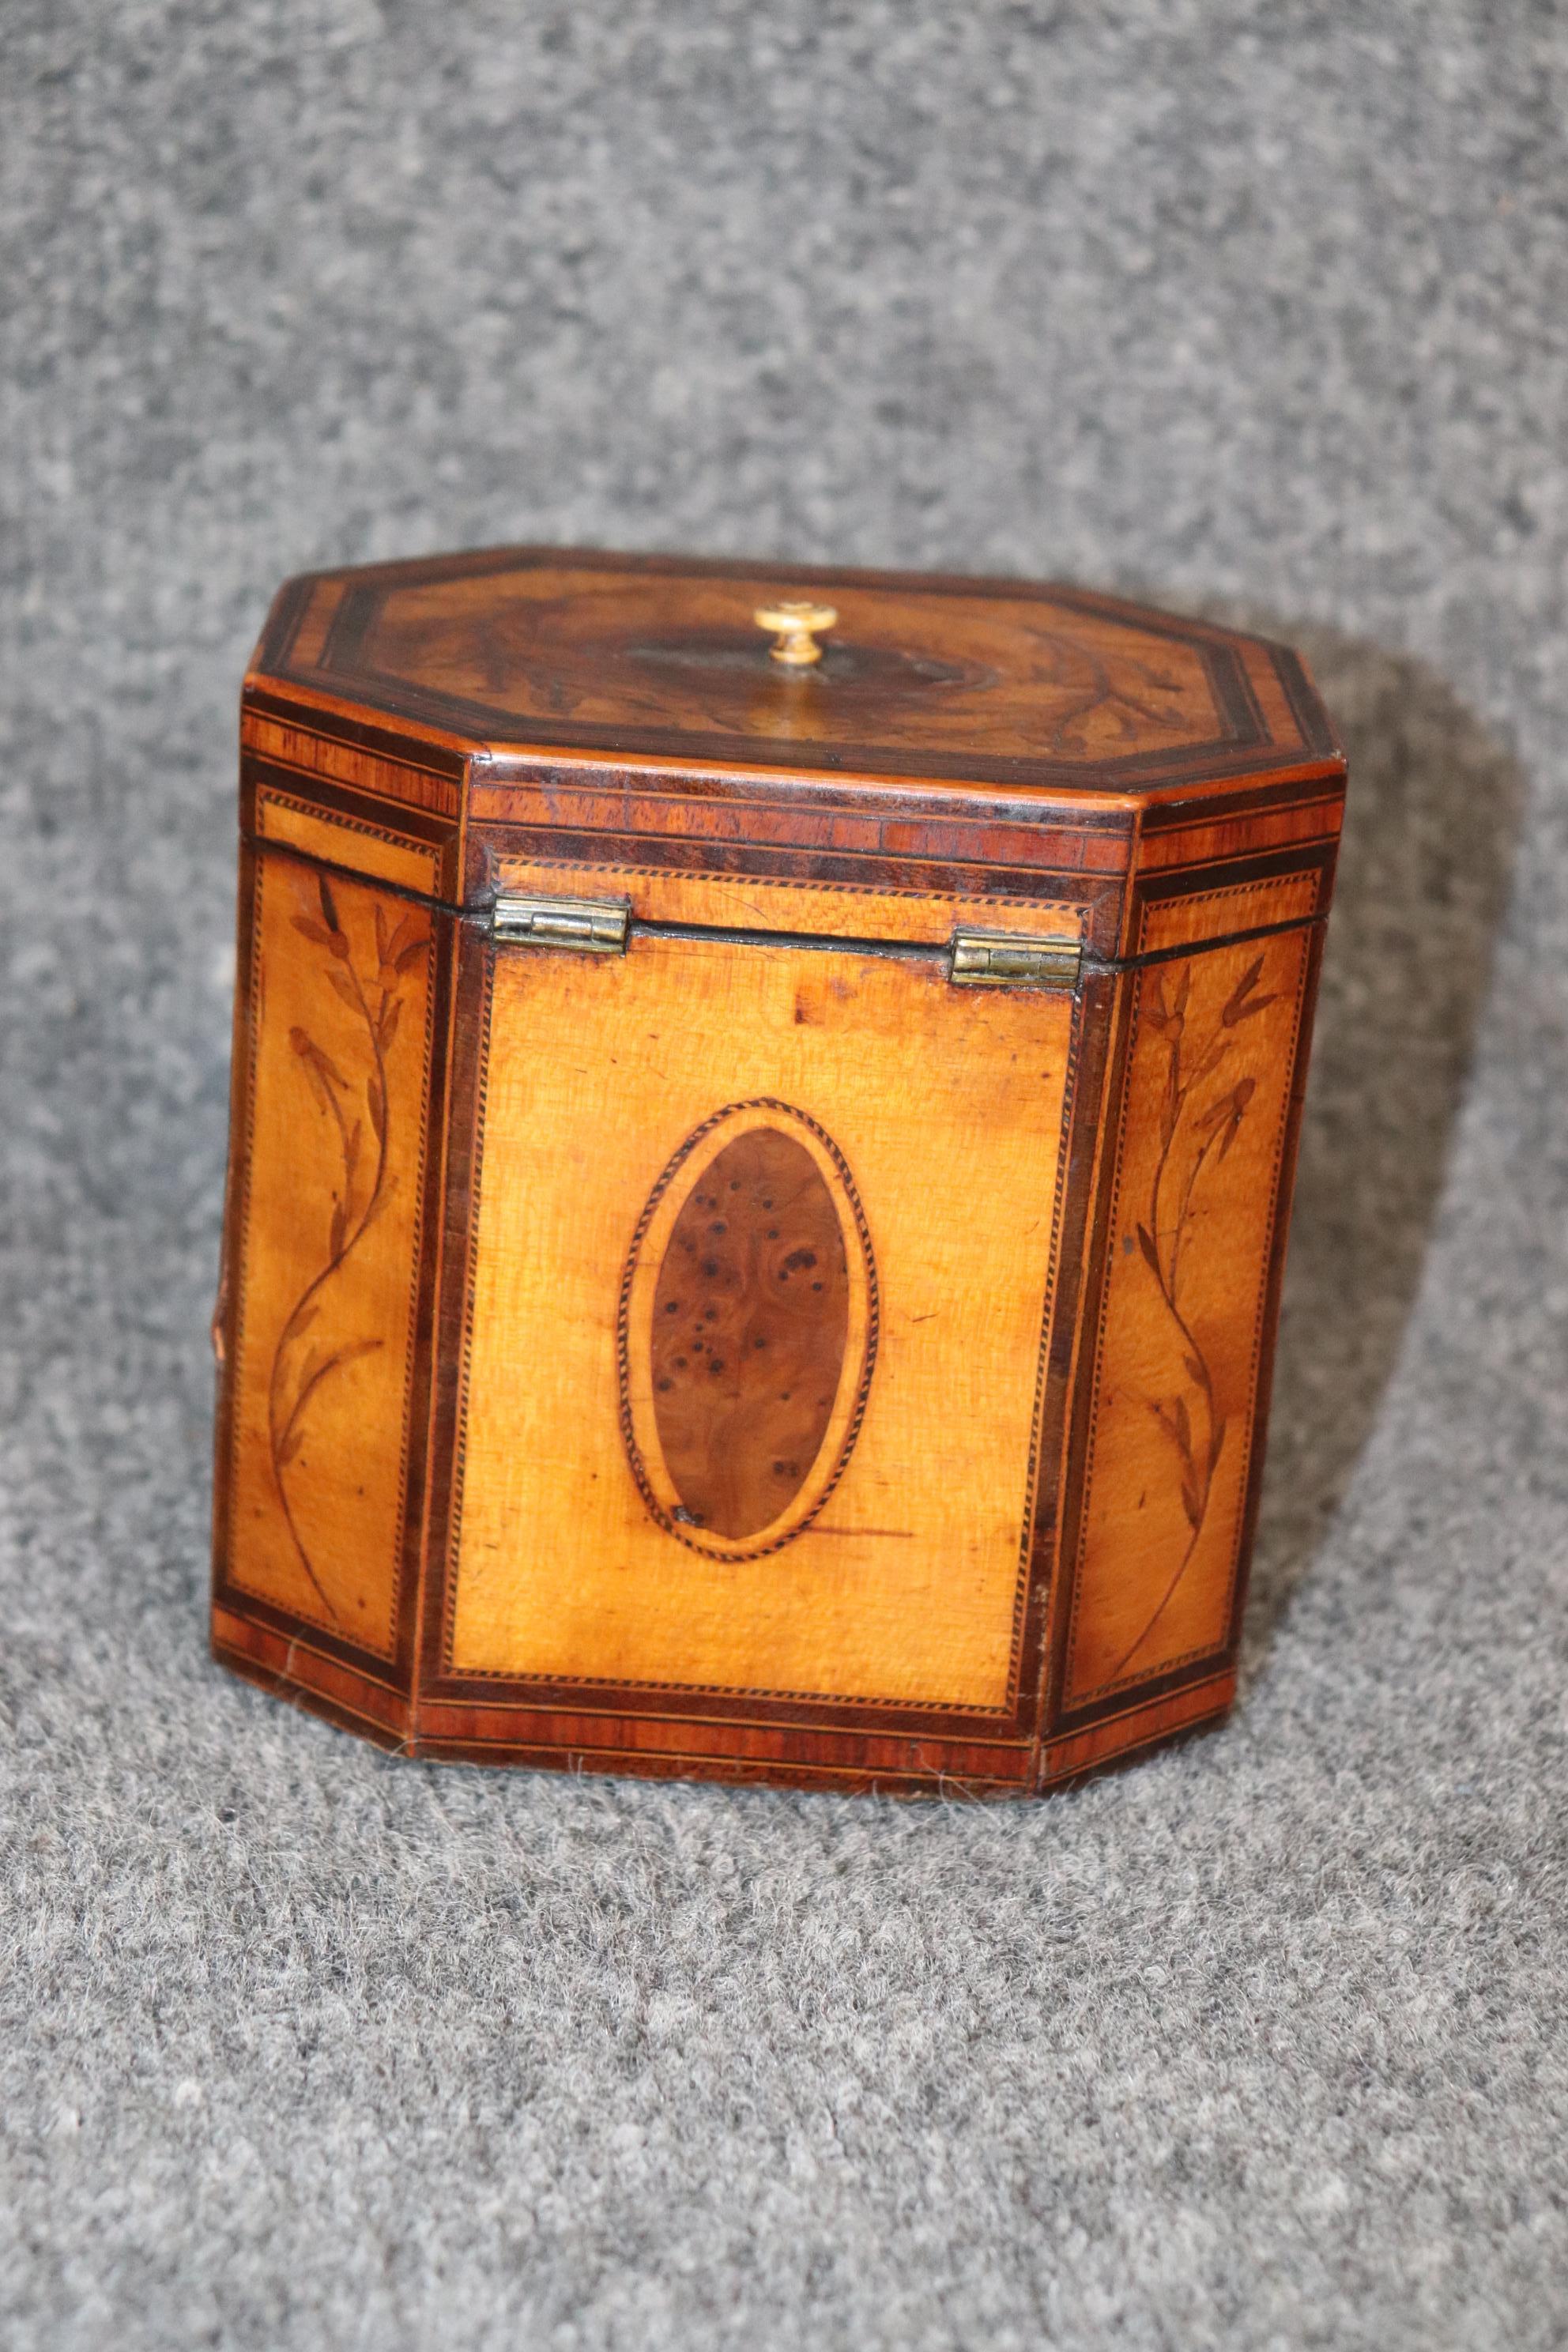 Antique 19th Century English Edwardian Inlaid Tea Caddy Box In Good Condition For Sale In Swedesboro, NJ